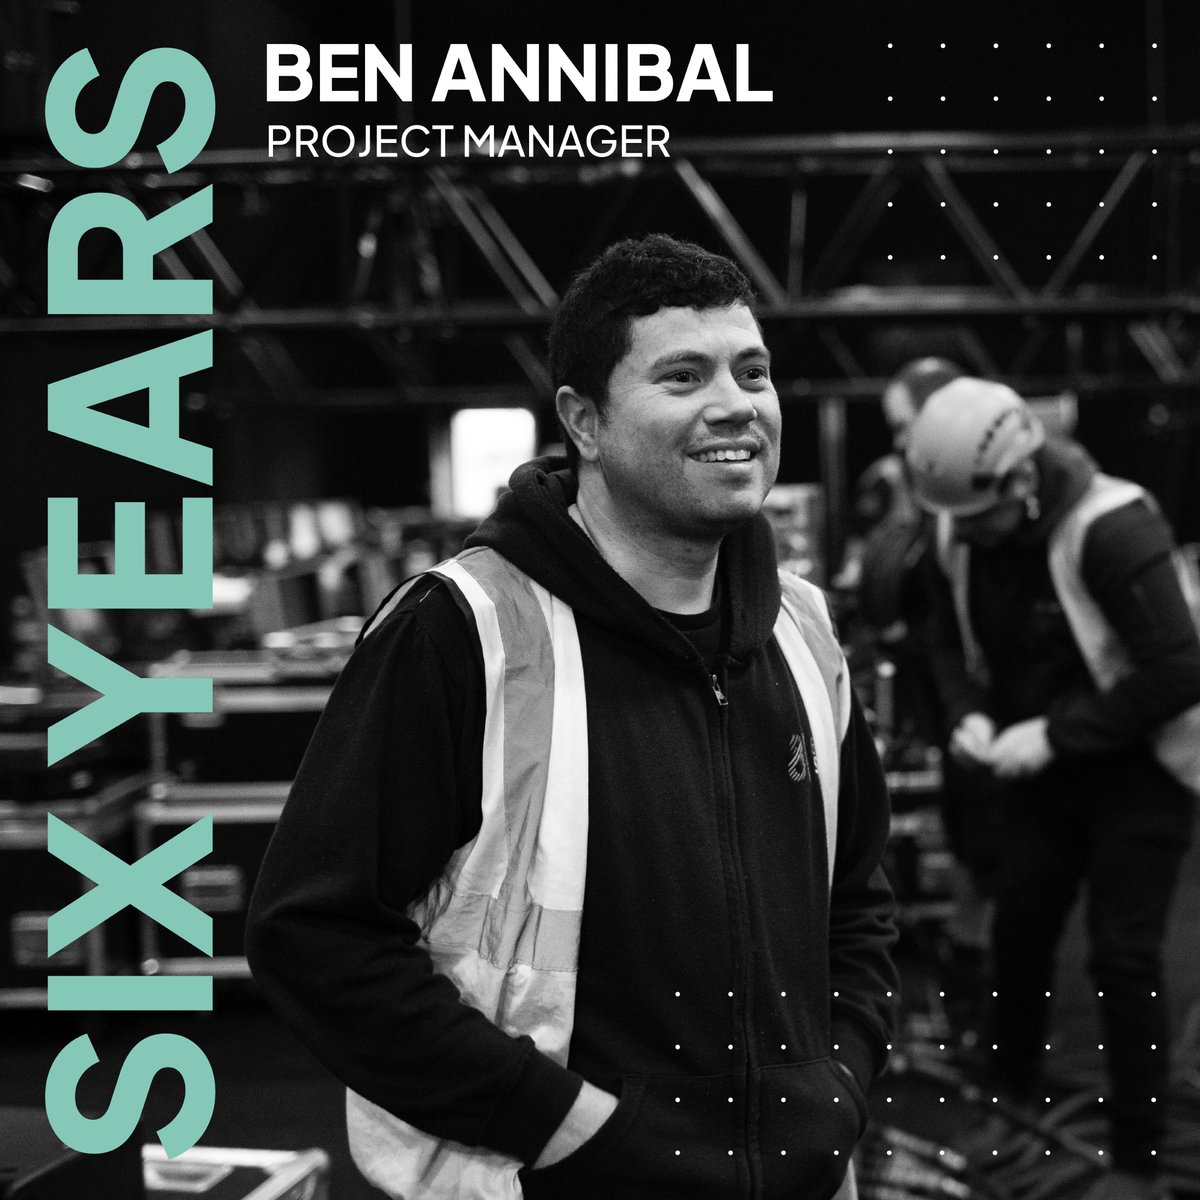 “80six has come a long way. As we’ve developed, so has the industry, which is still going strong. What hasn’t changed as much is the close knit-community who have been great to work with all through my career.”

Congrats on 6 years with 80six Ben! 

#eventprofsuk #avtweeps